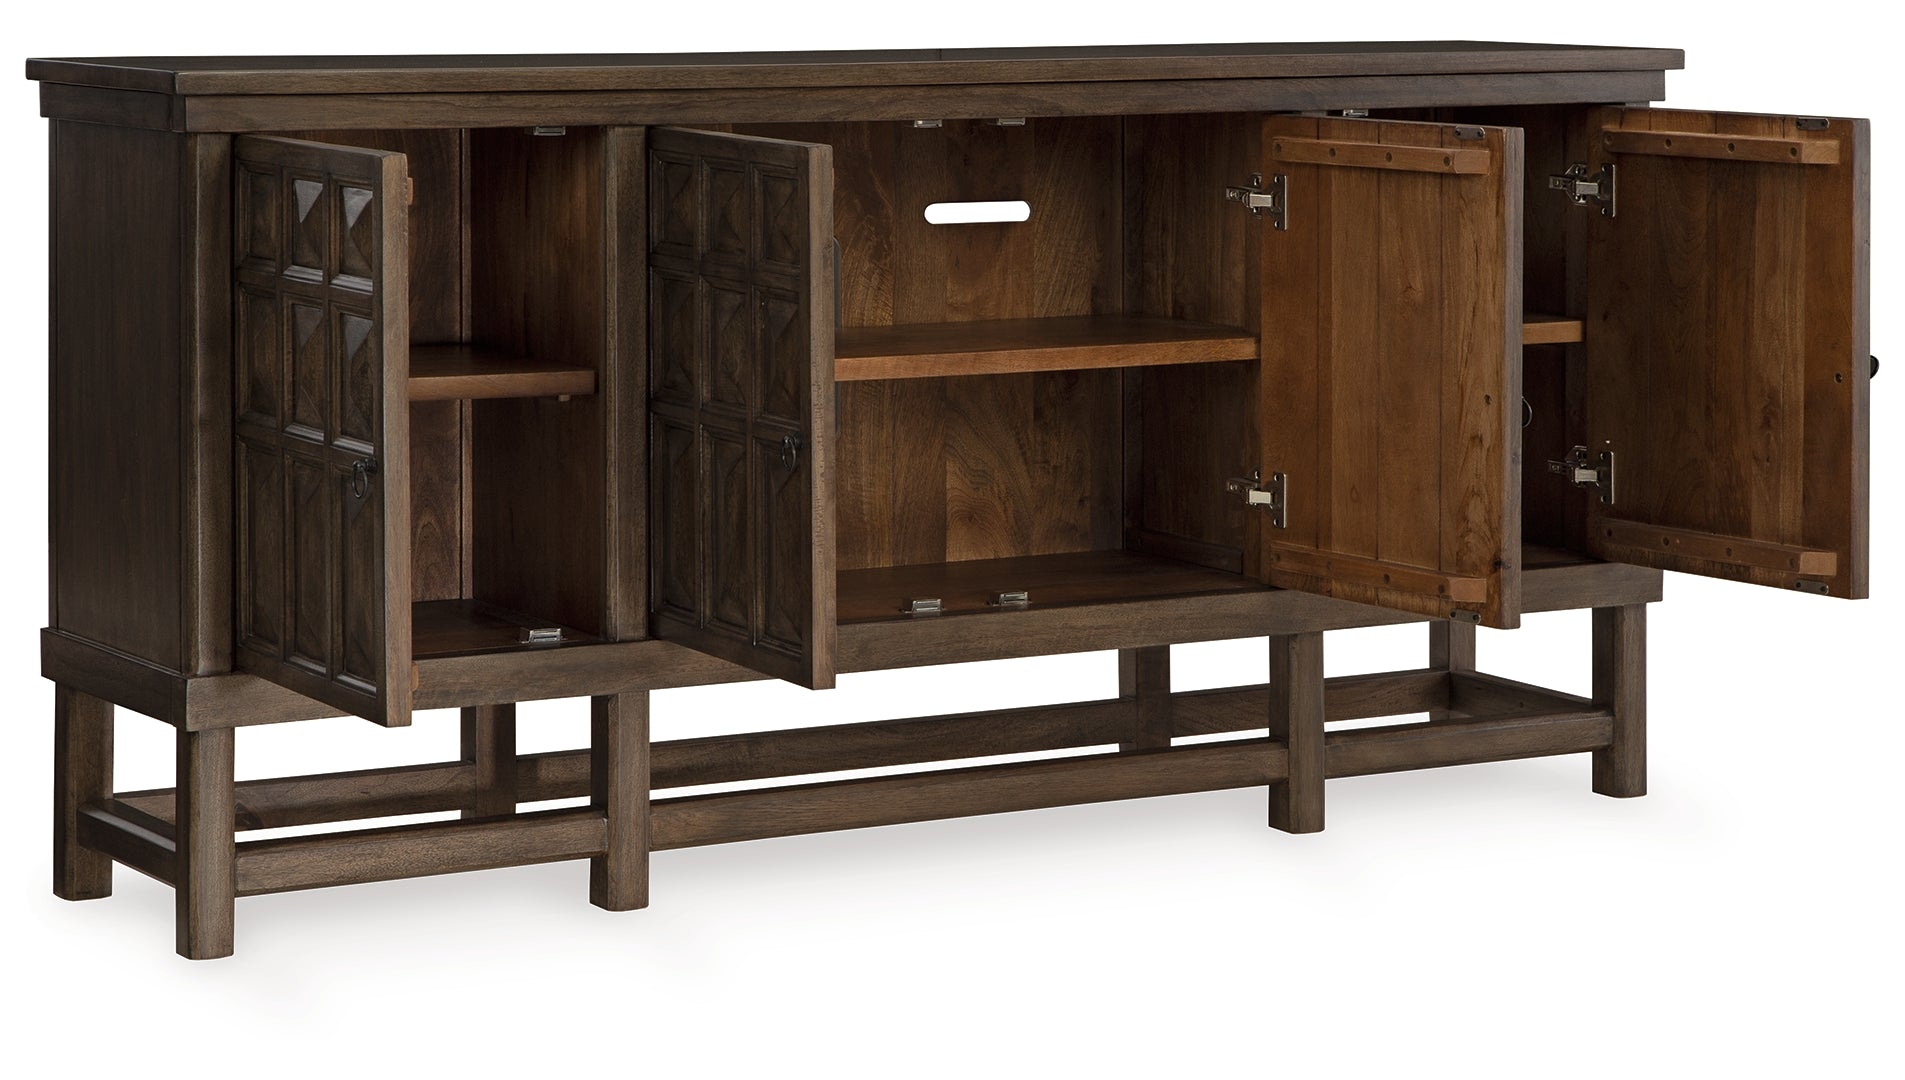 Braunell Accent Cabinet